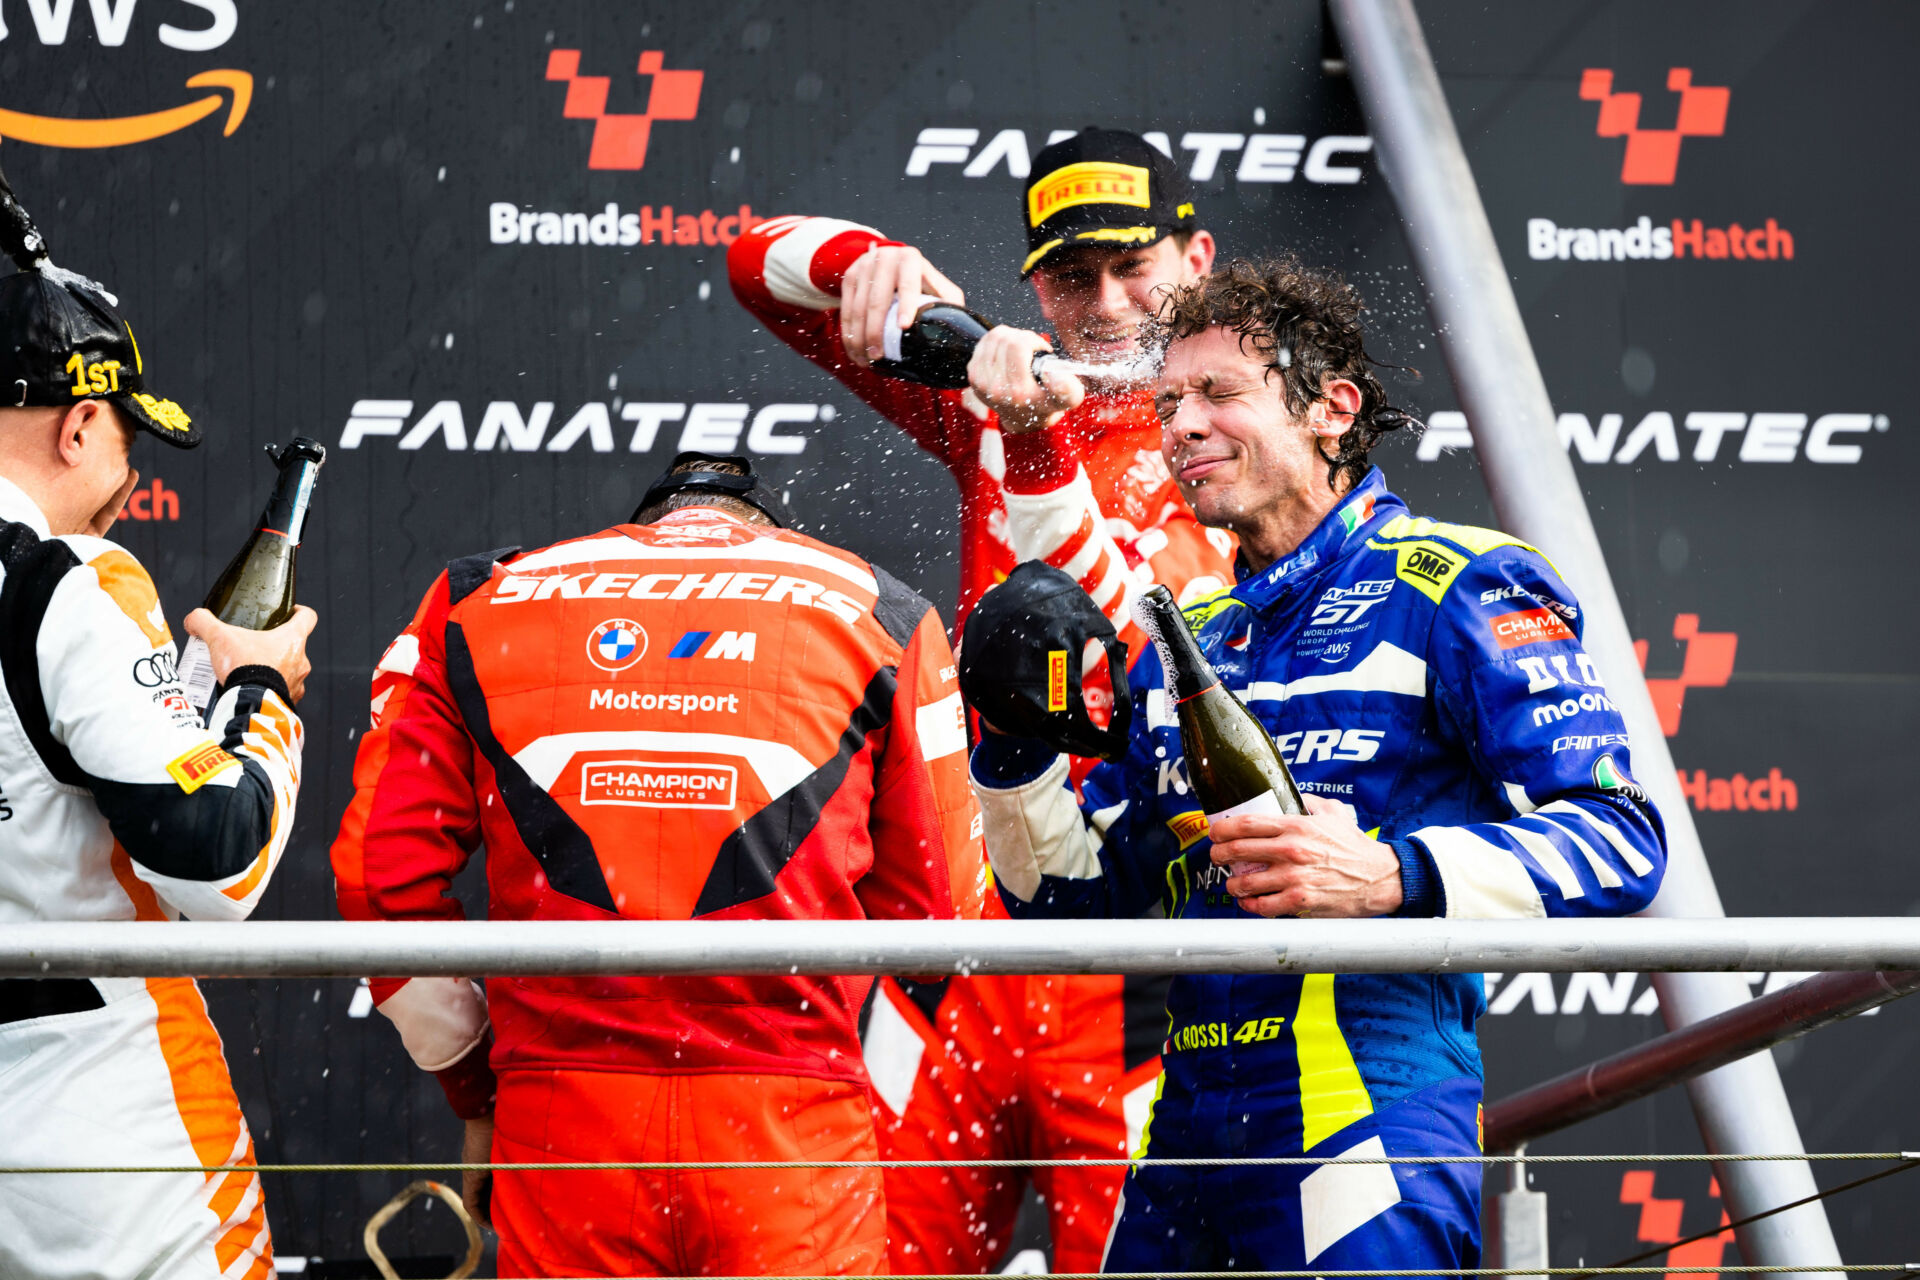 Valentino Rossi (right) enjoying a champagne shower at Brands Hatch. Photo courtesy Team WRT.